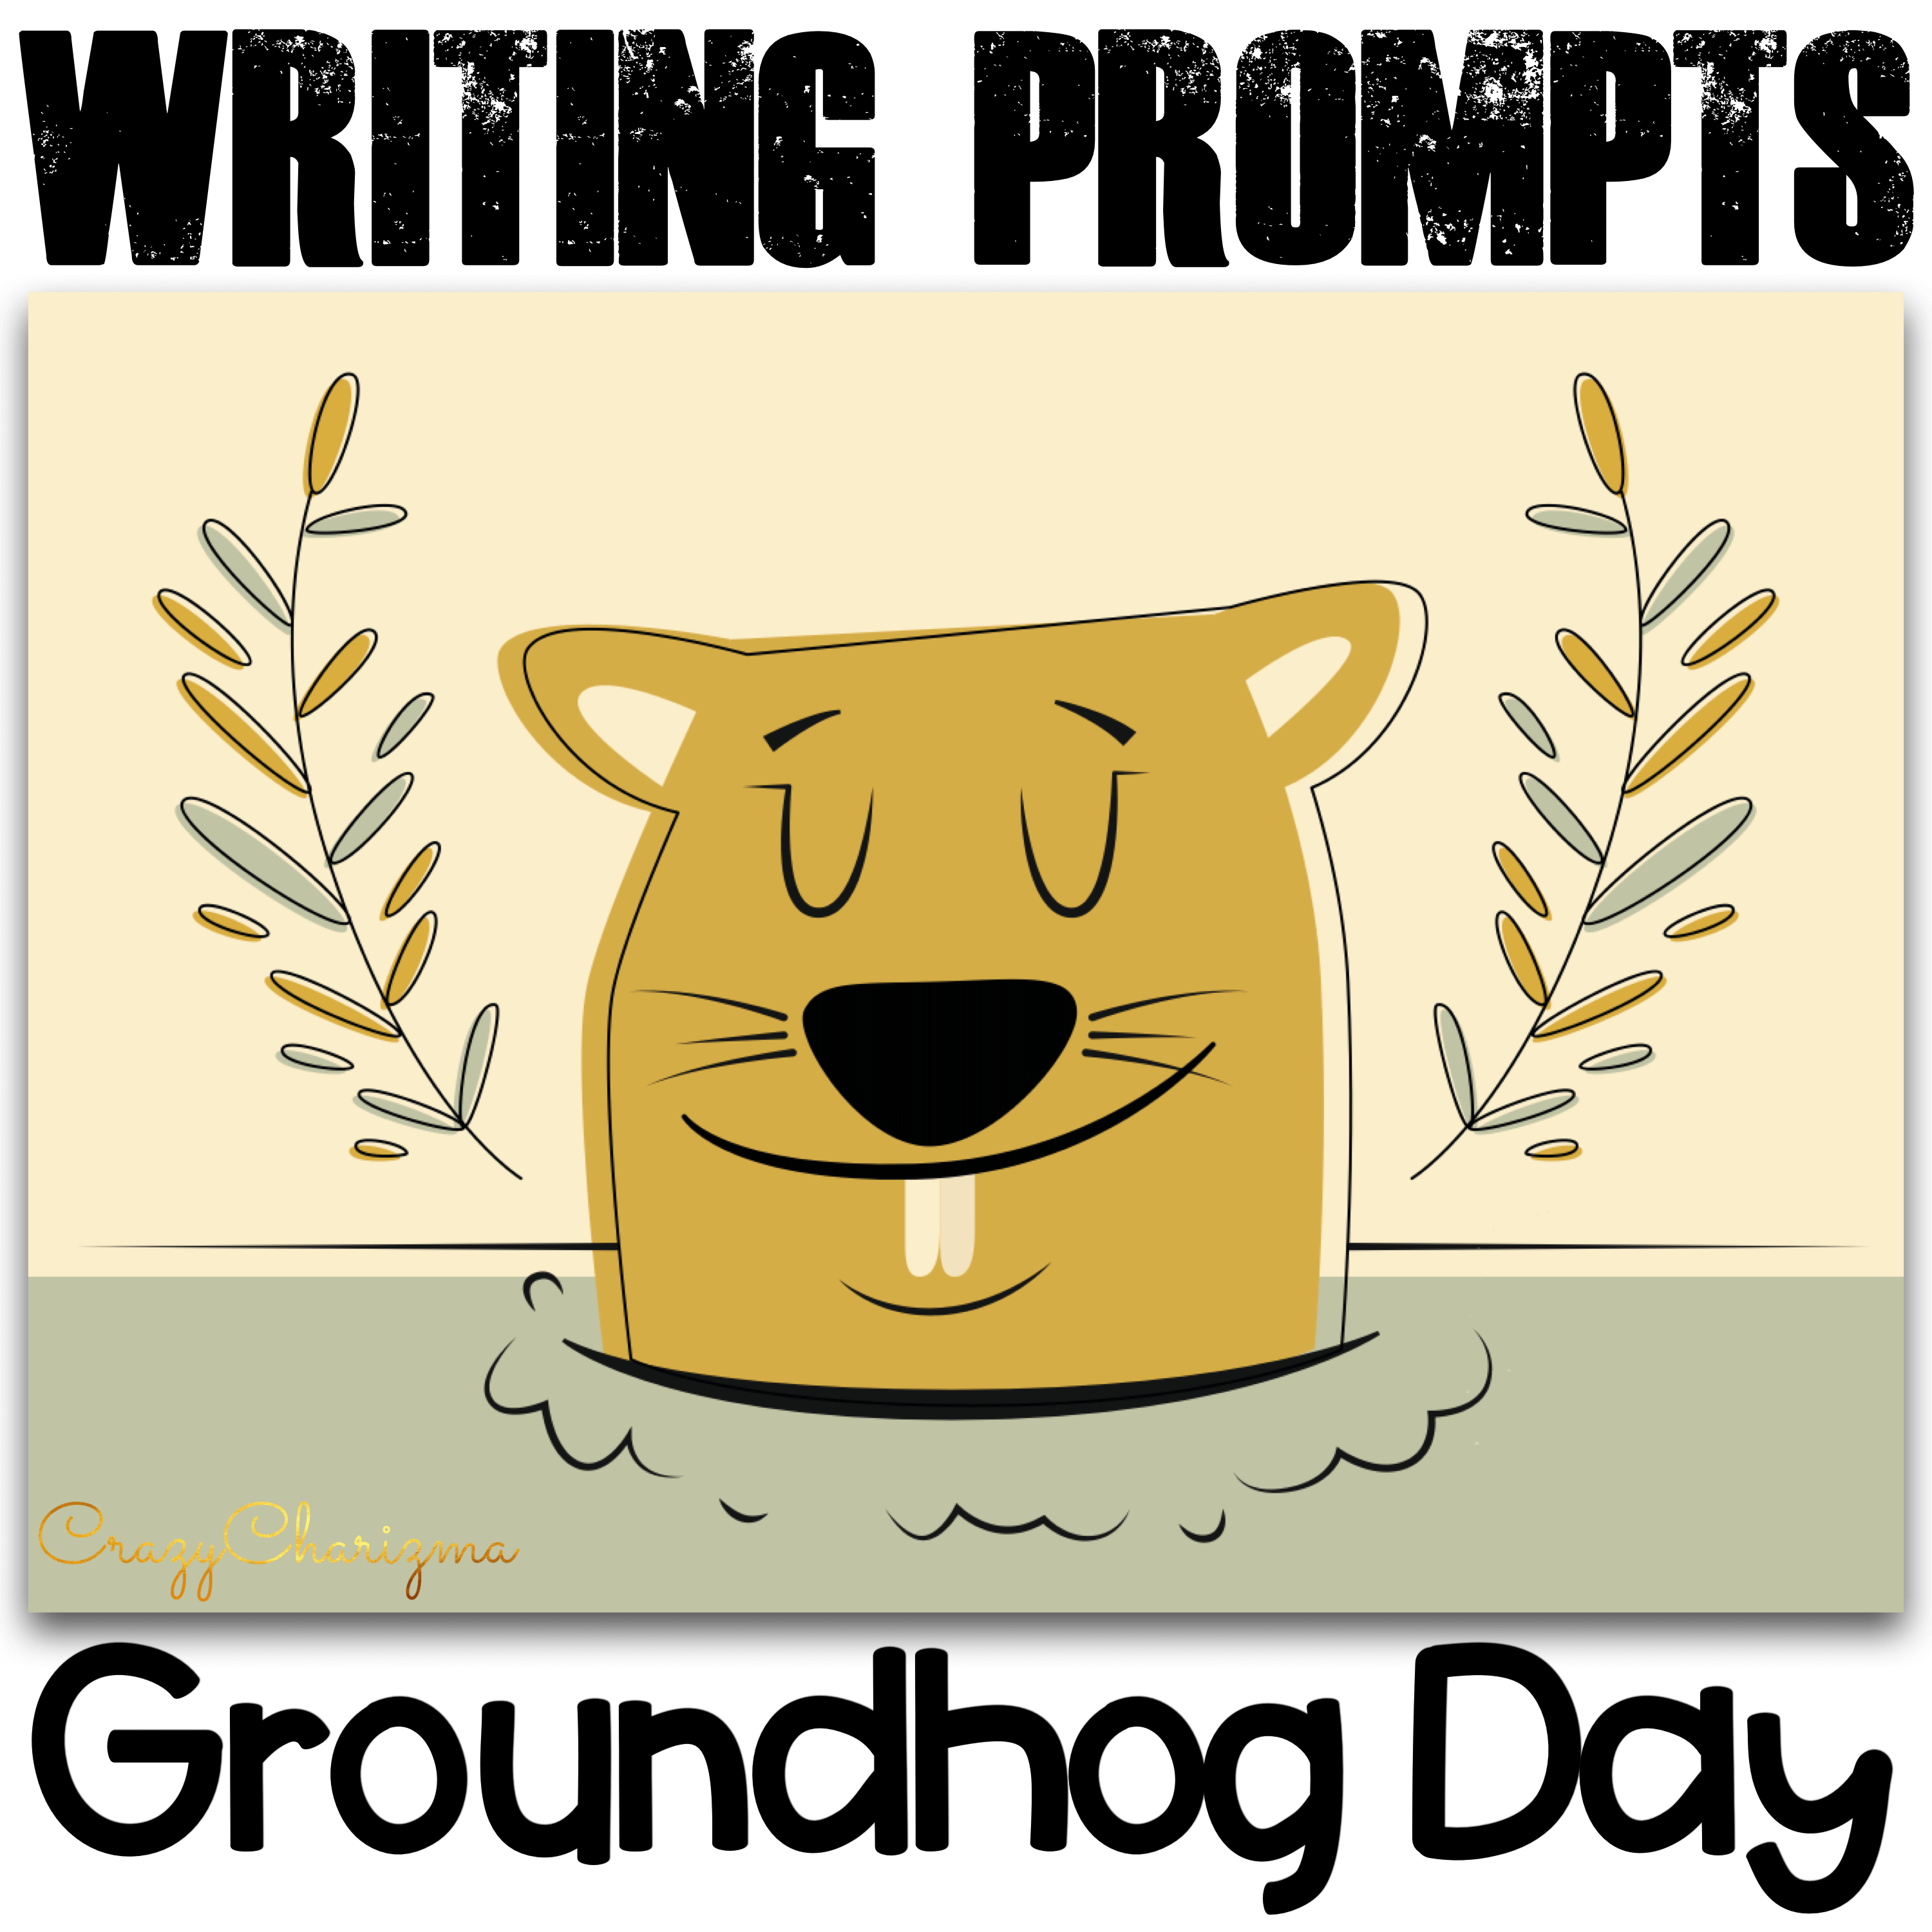 Celebrate Groundhog Day in your classroom and provide students with writing tasks and ideas. The packet contains narrative, informational and opinion writing prompts for teens. The prompts can be used as Writing Centers, as well as with adults during ESL lessons.